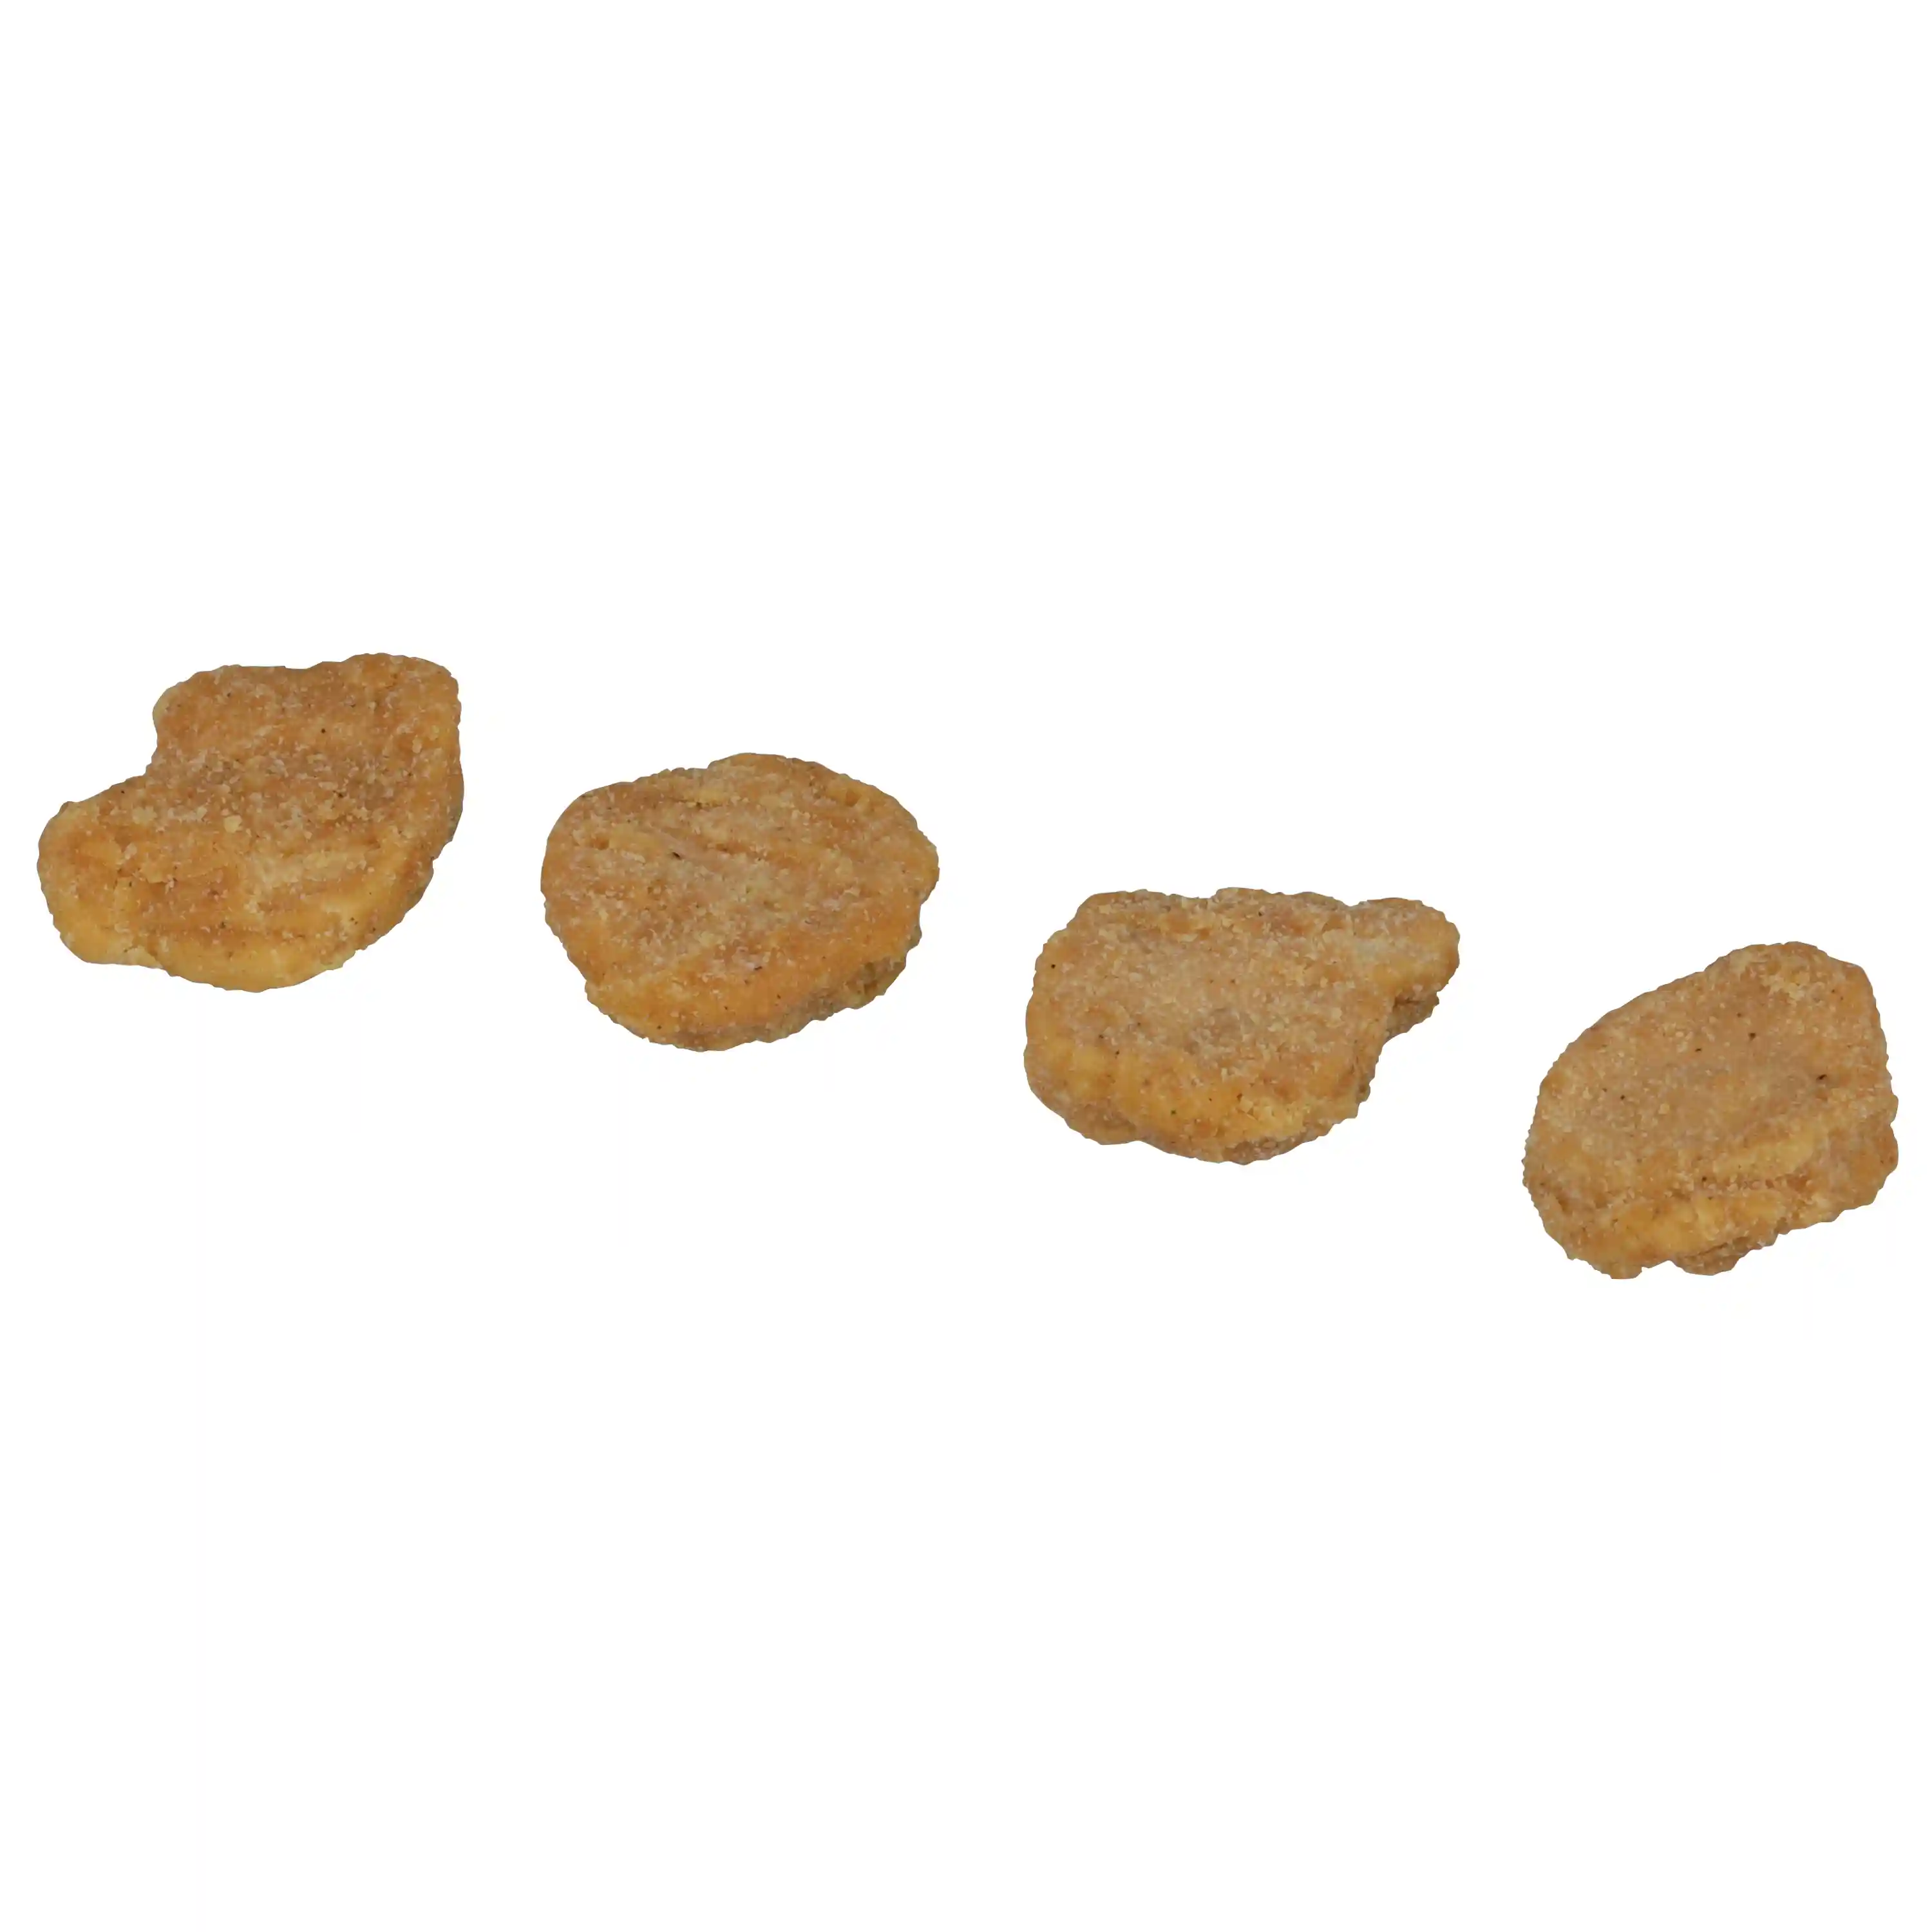 Tyson® Fully Cooked Whole Grain Breaded Chicken Nuggets, CN, 0.68 oz. _image_11